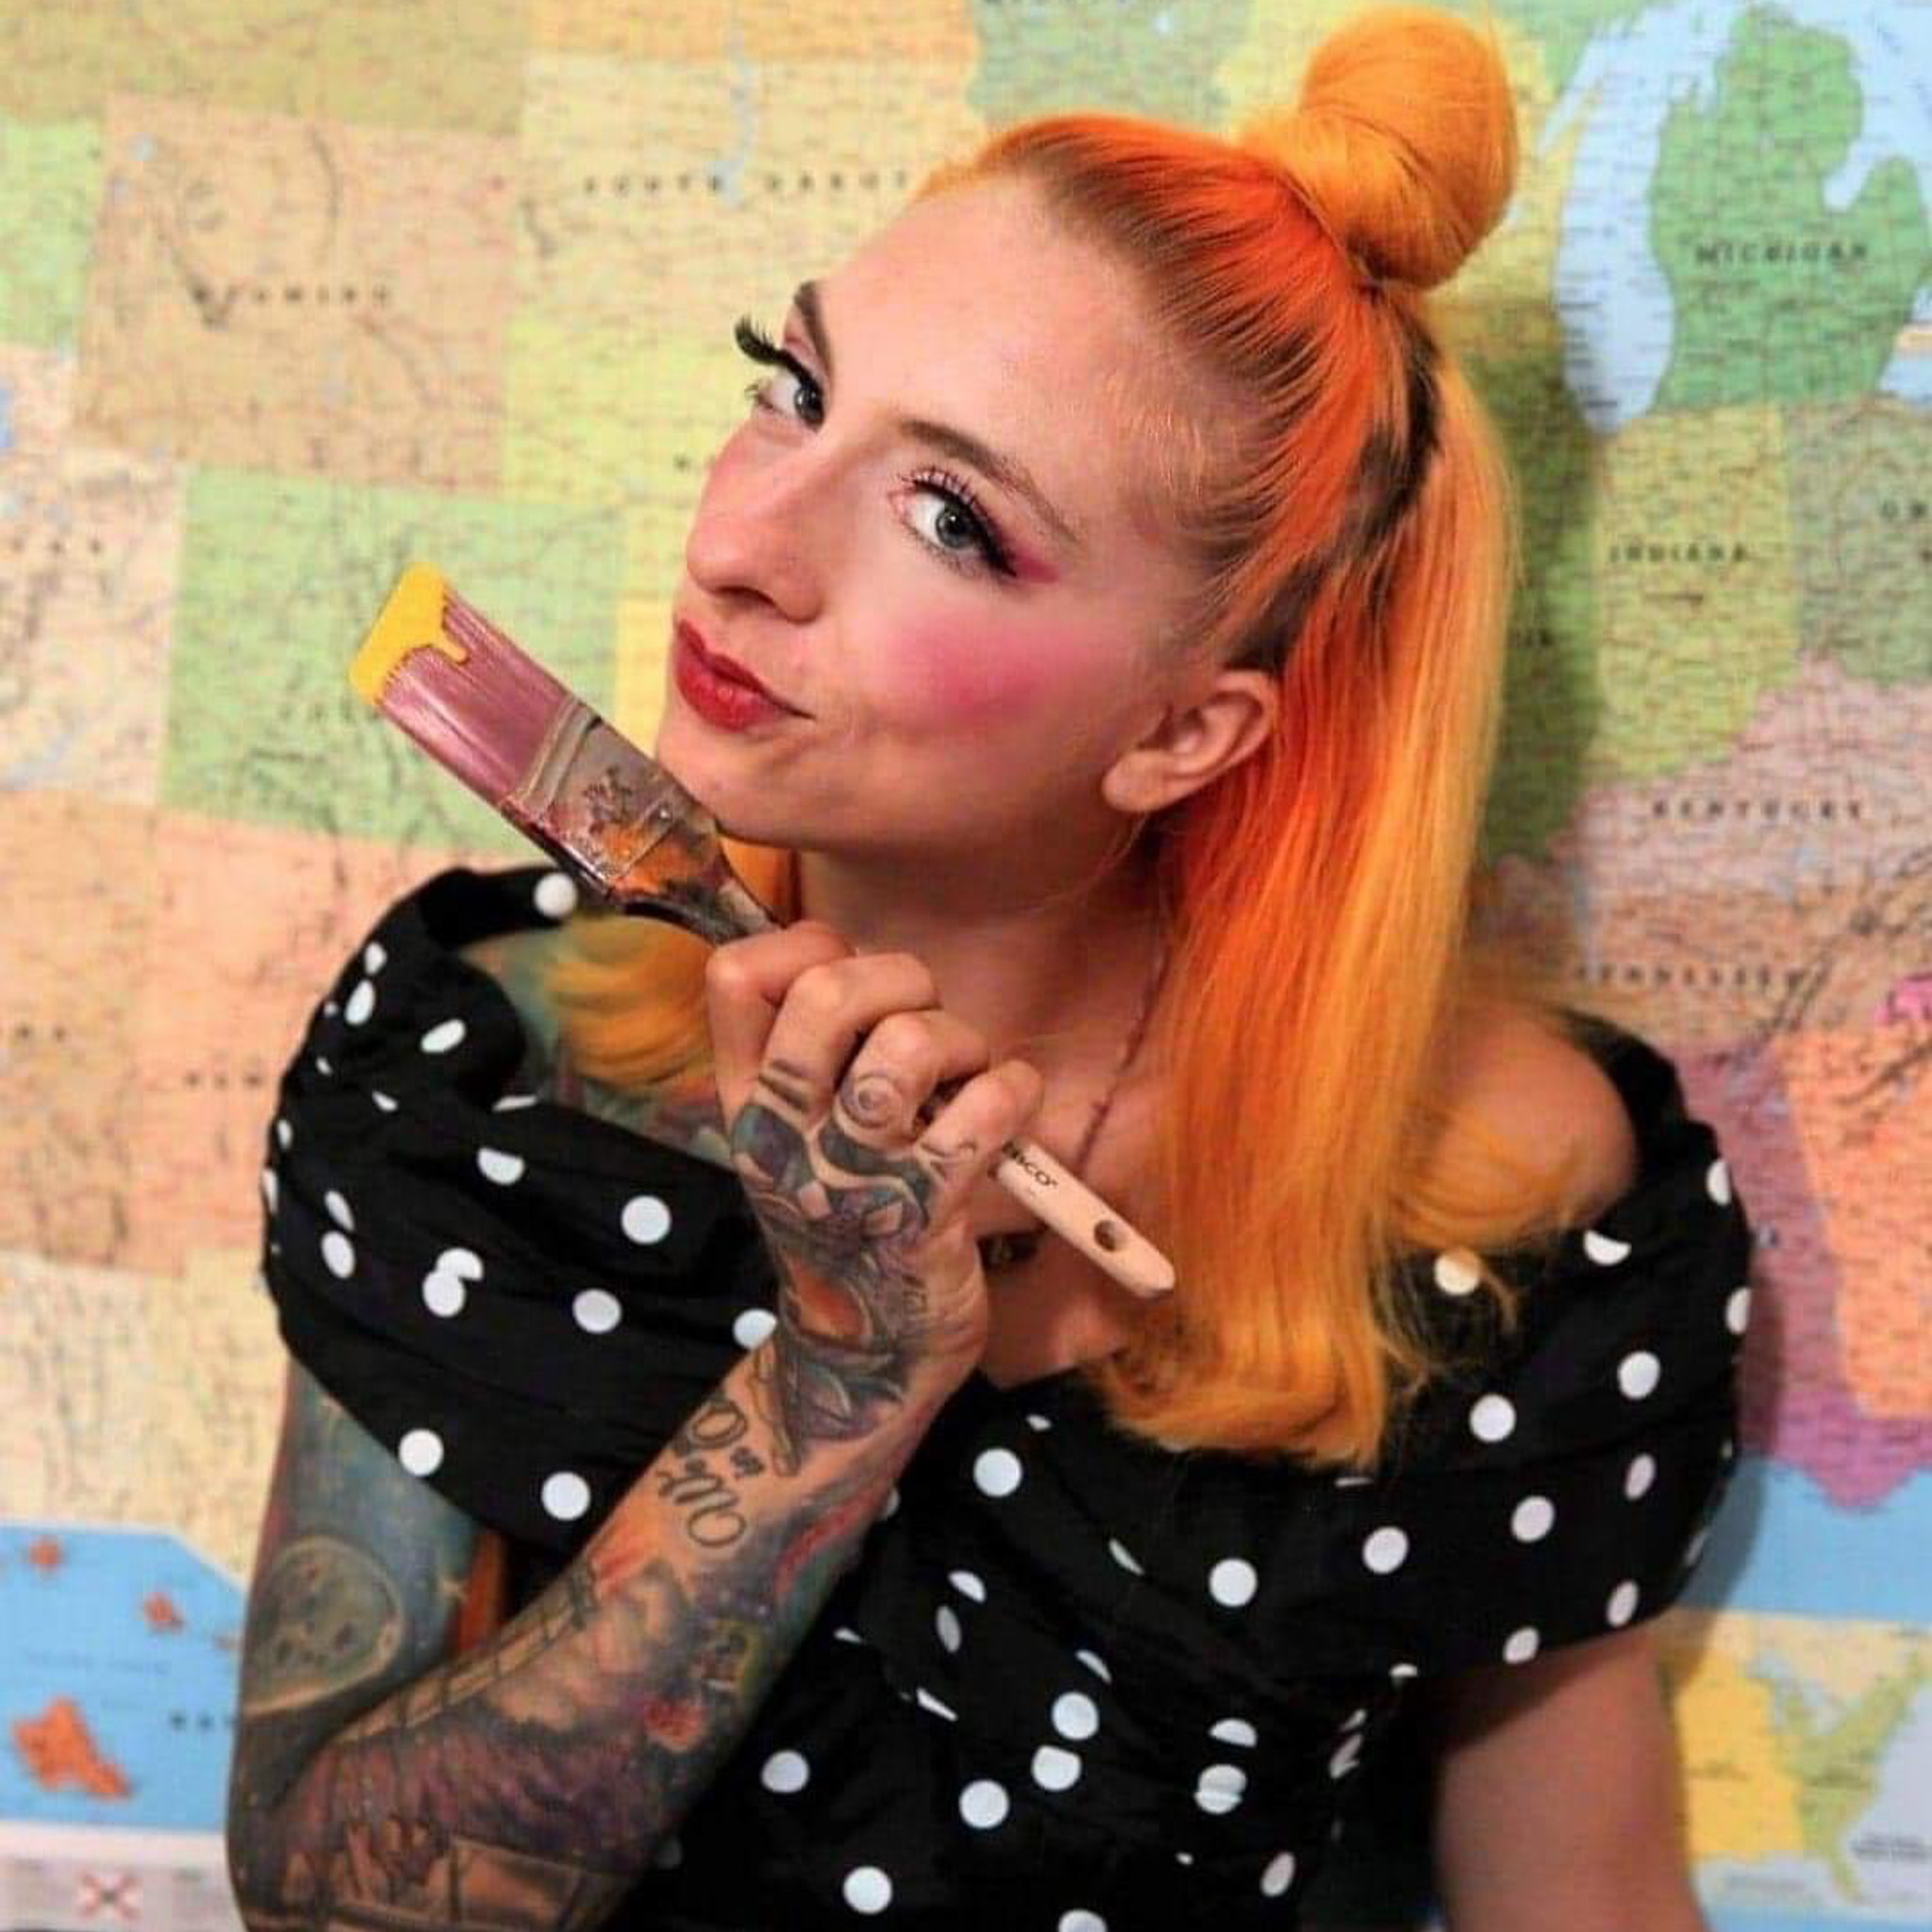 Woman in front of a map background holding a paintbrush.